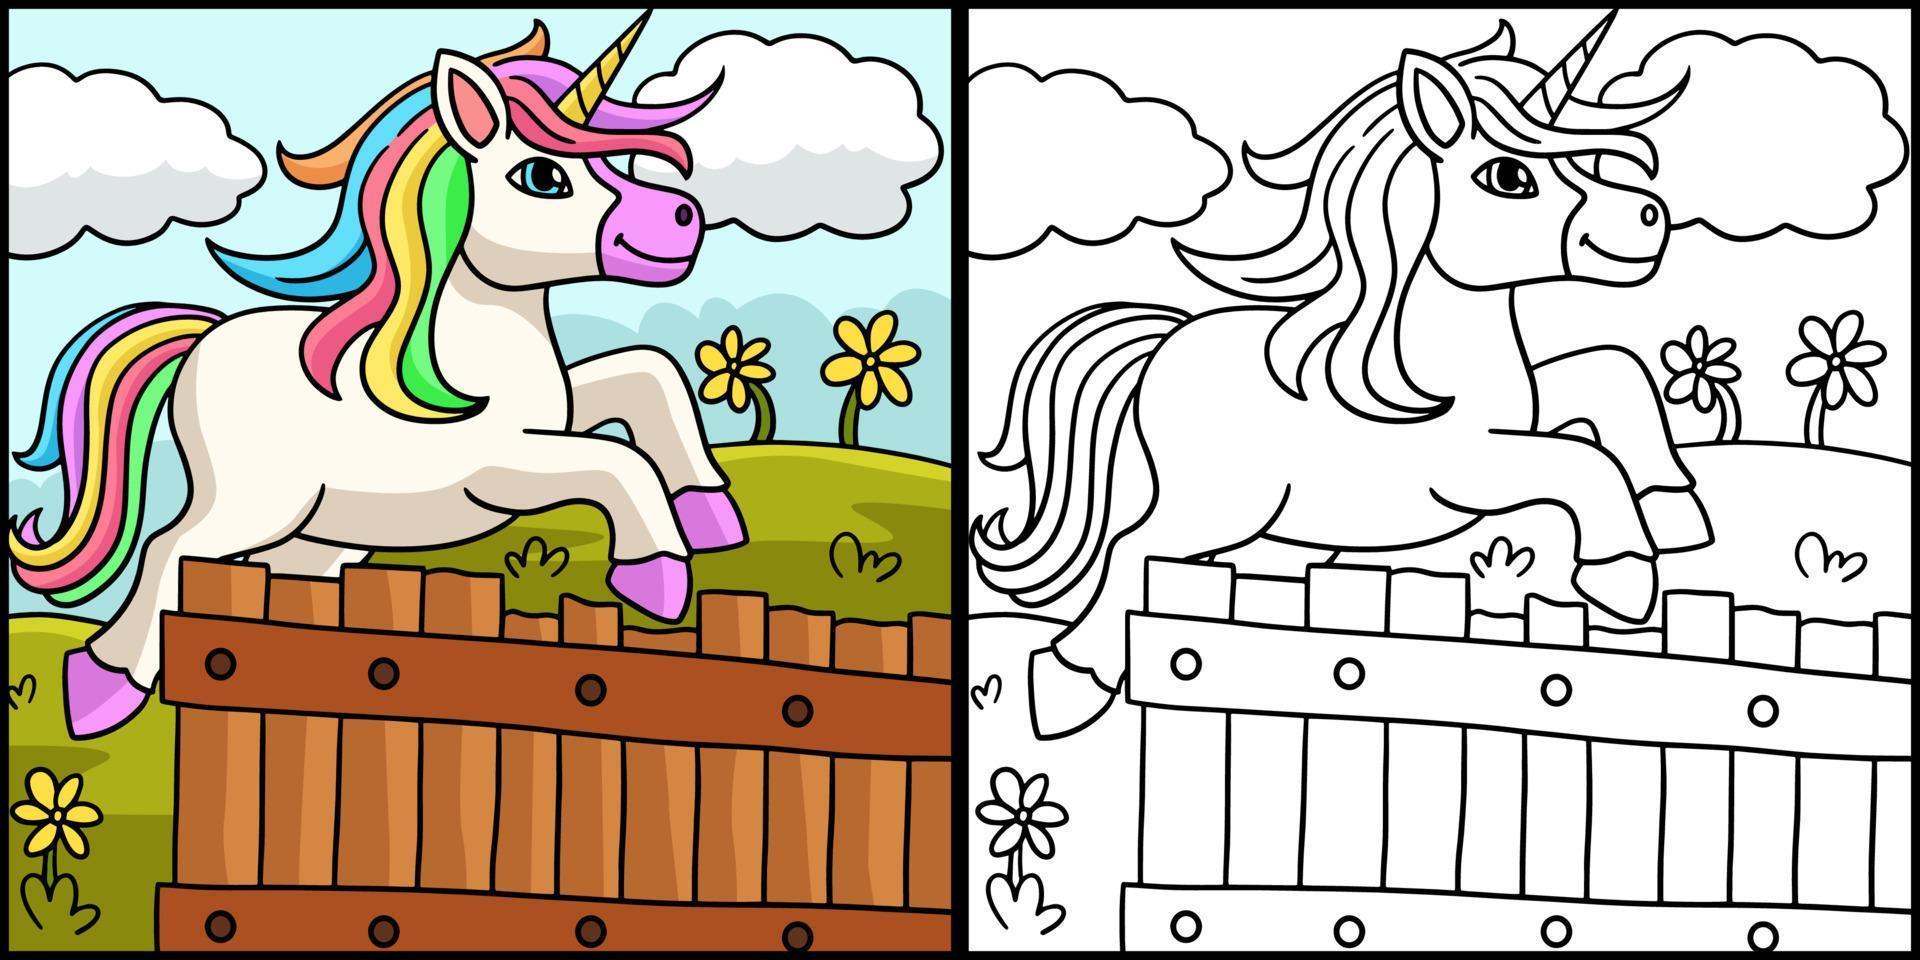 Jumping Unicorn Coloring Page Illustration vector